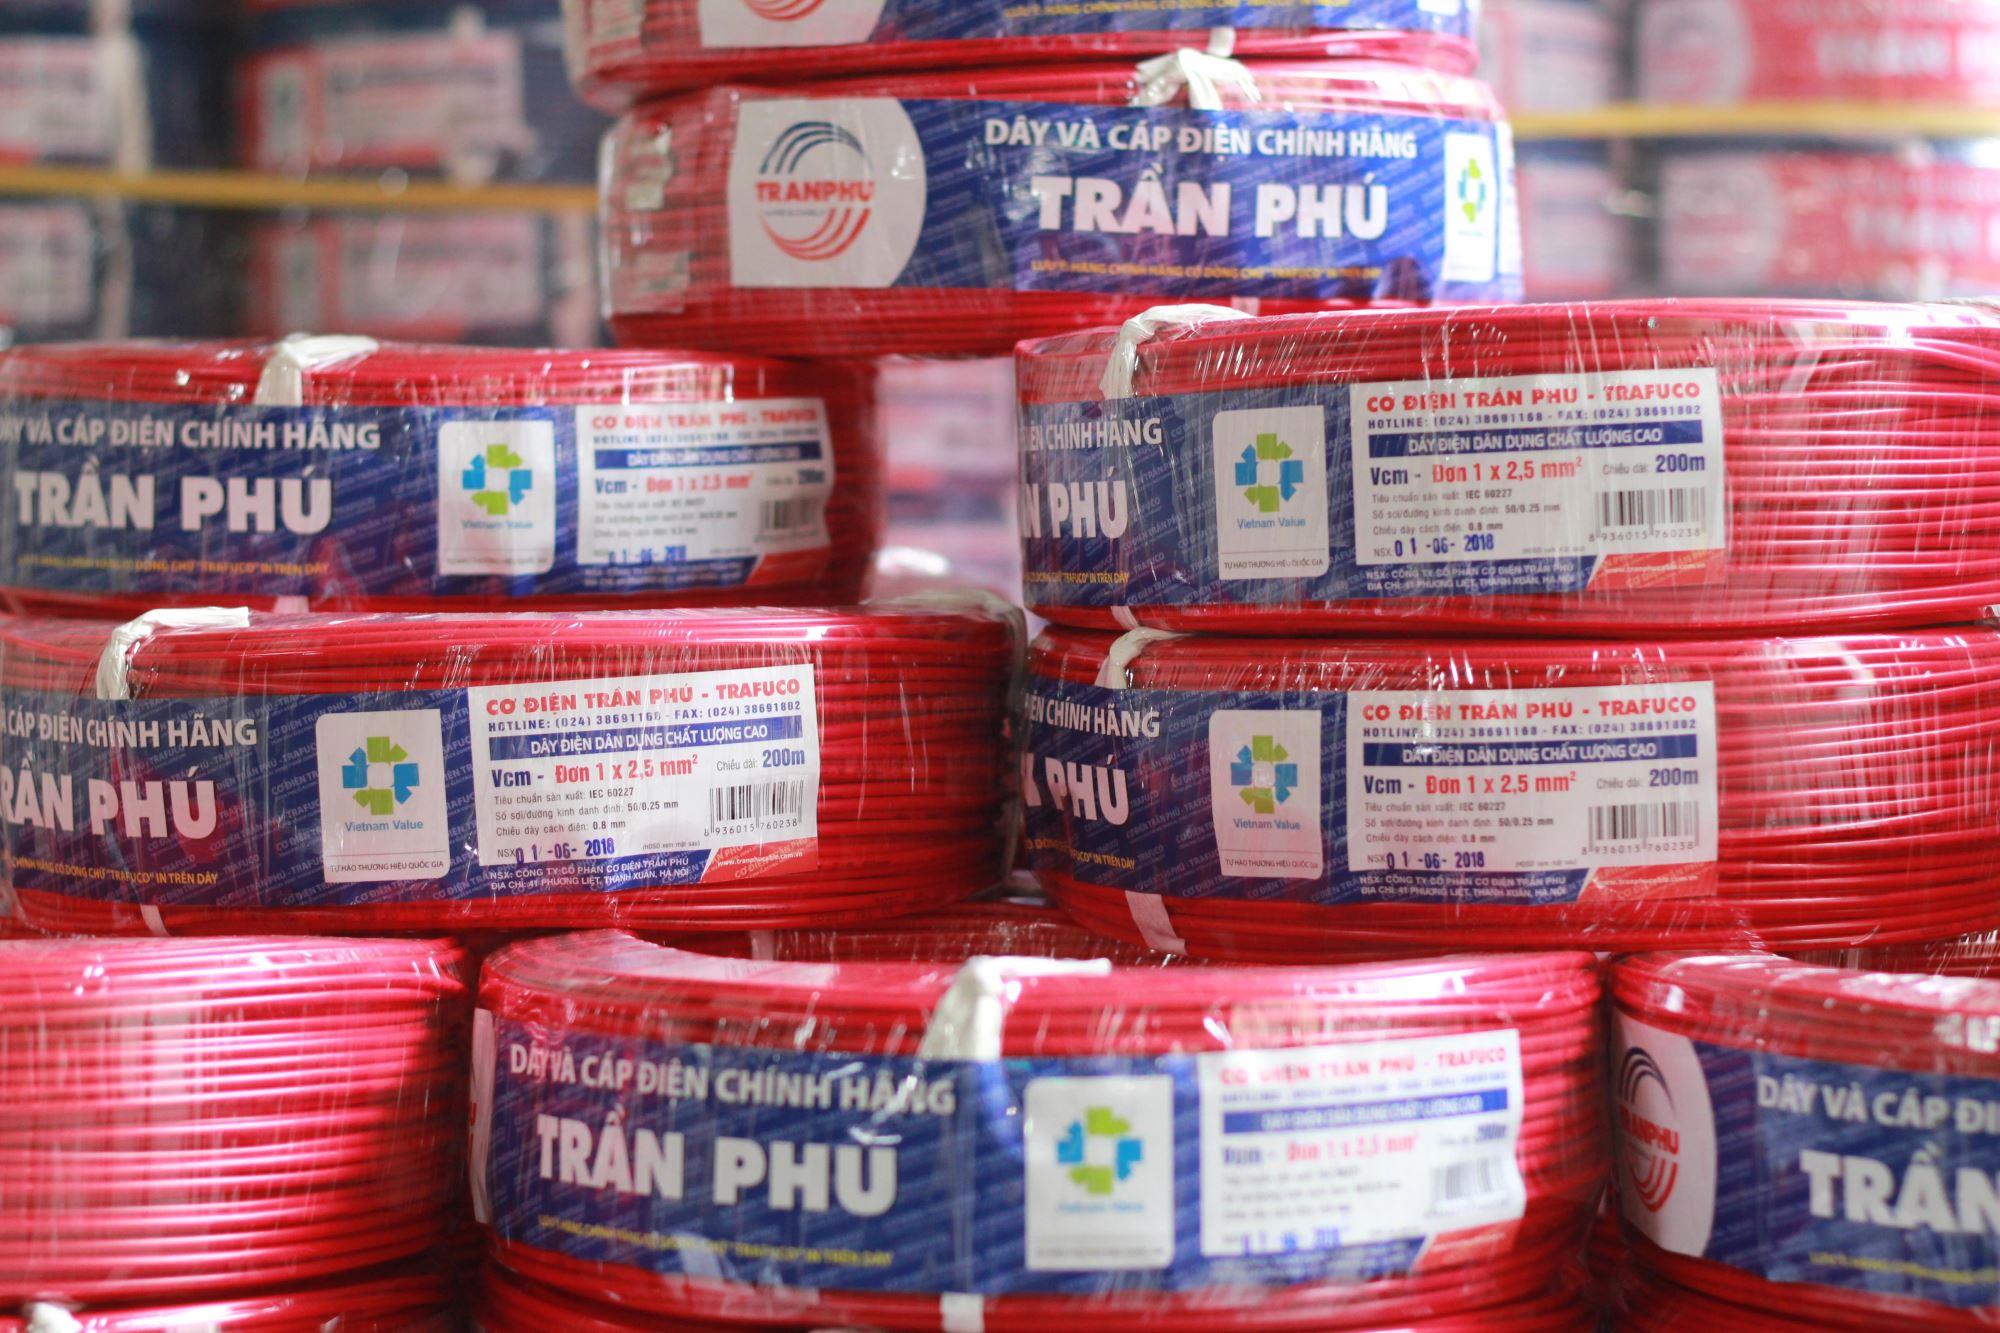 Some common wiring methods and types of wires recommended by Tran Phu